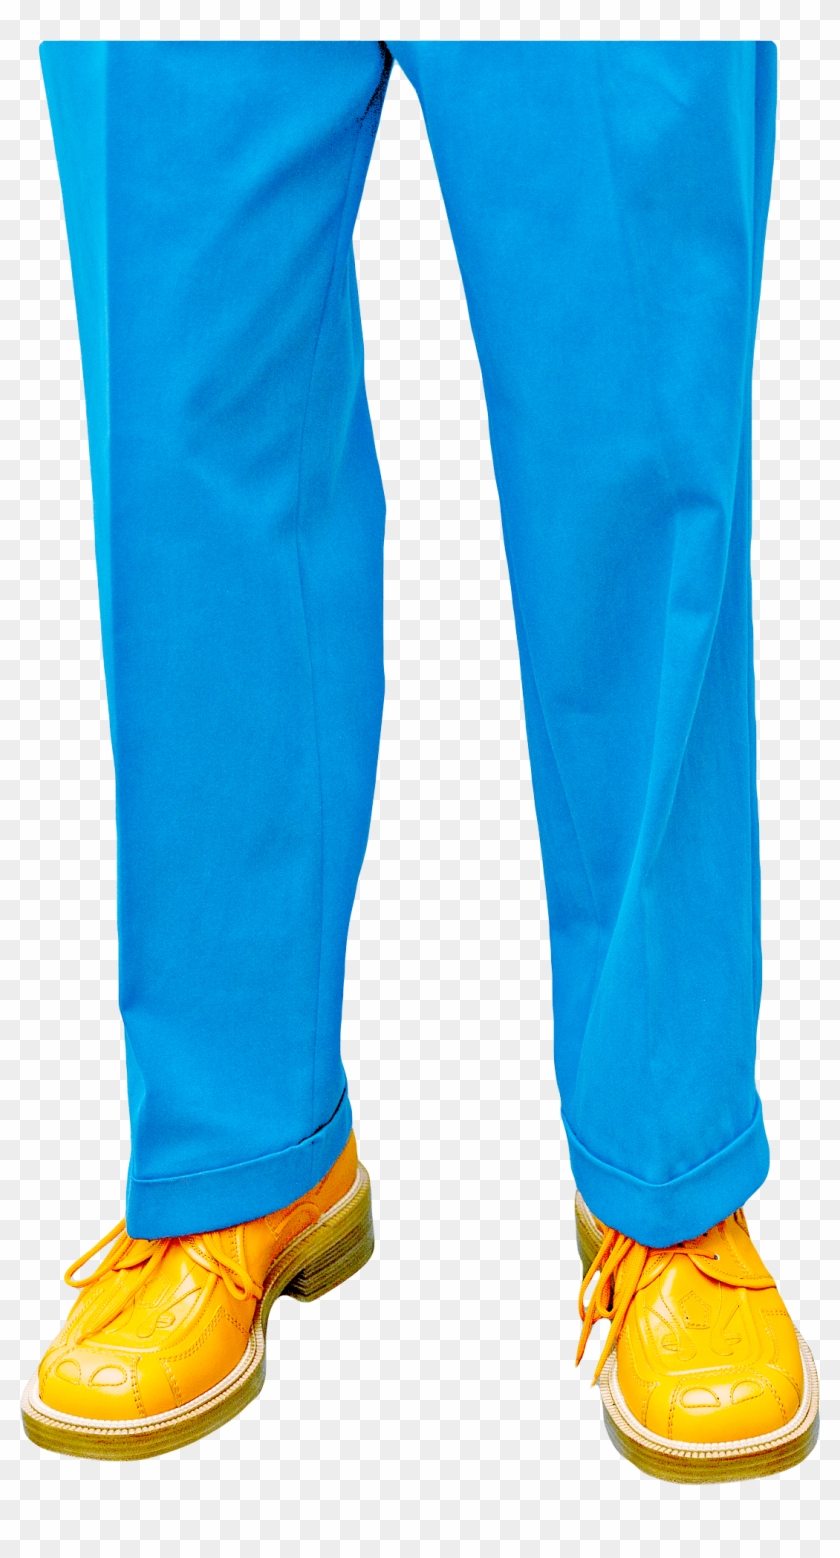 Blue Trousers And Yellow Shoes - Pants And Shoes Png Clipart #18020